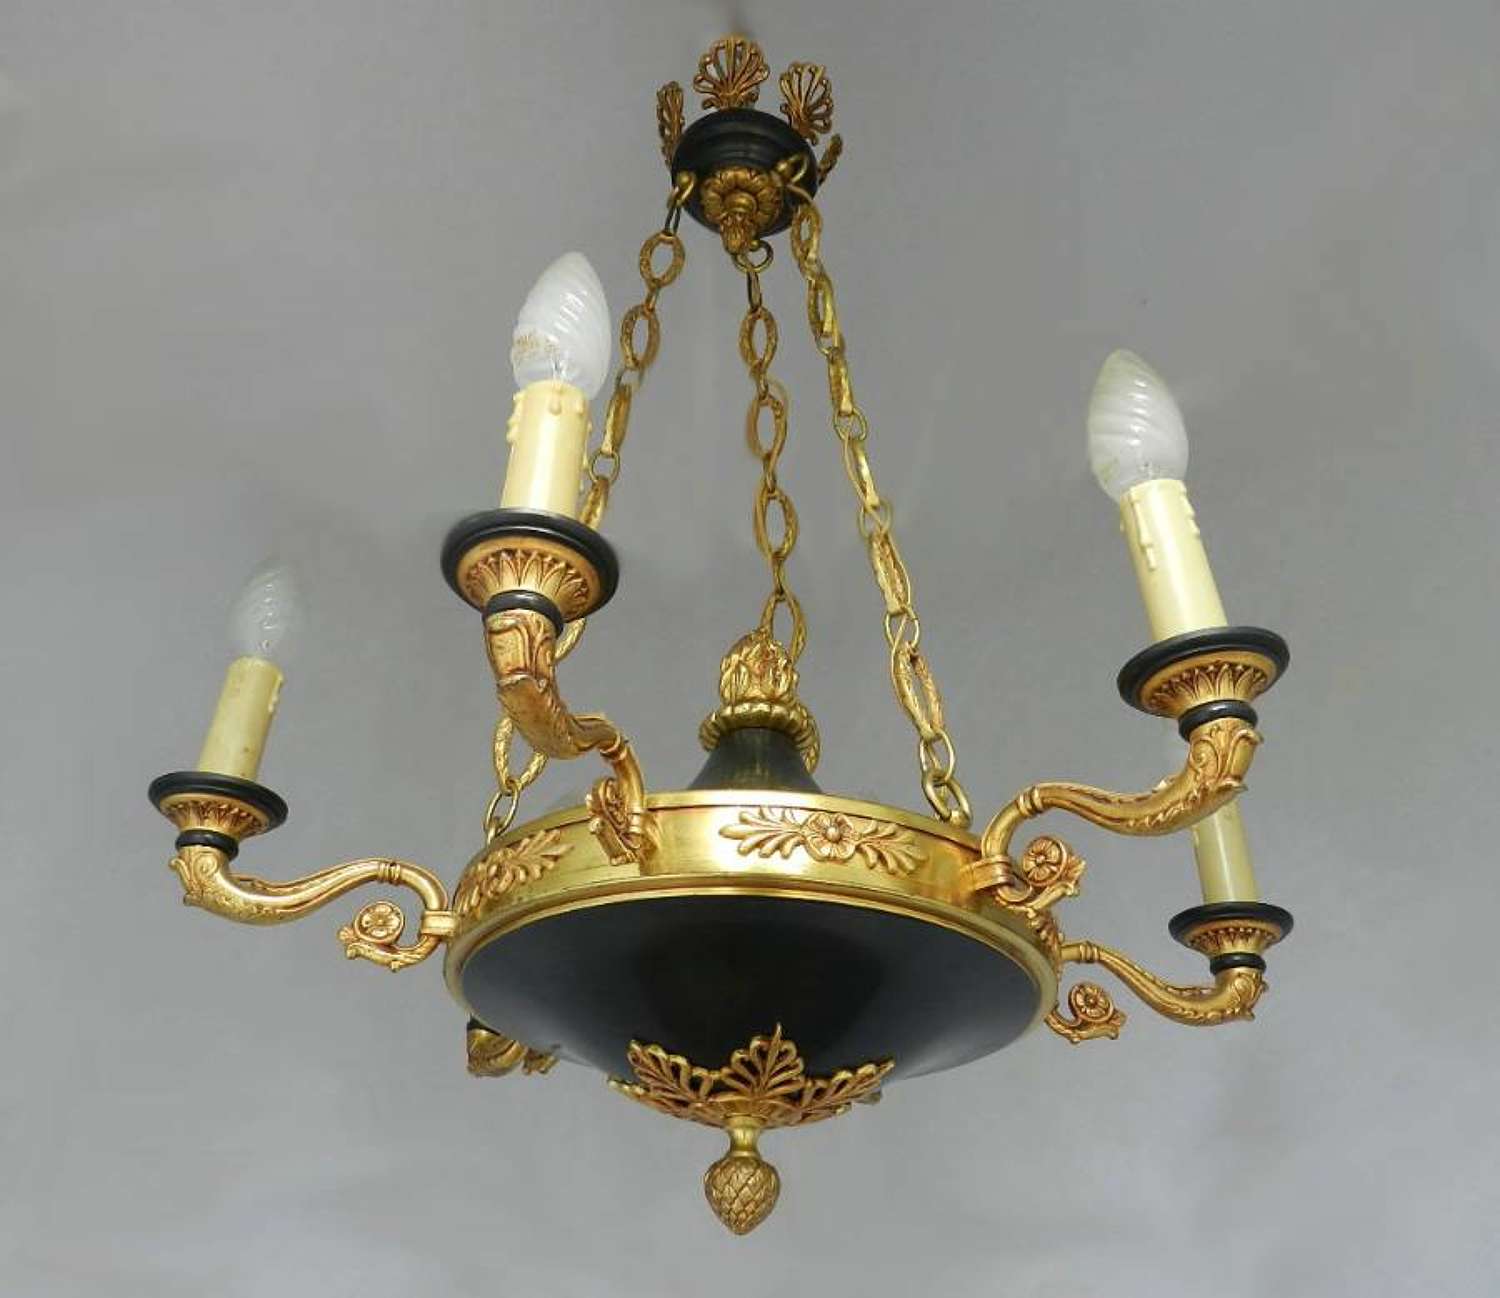 French Empire revival Ceiling Light Tole Chandelier